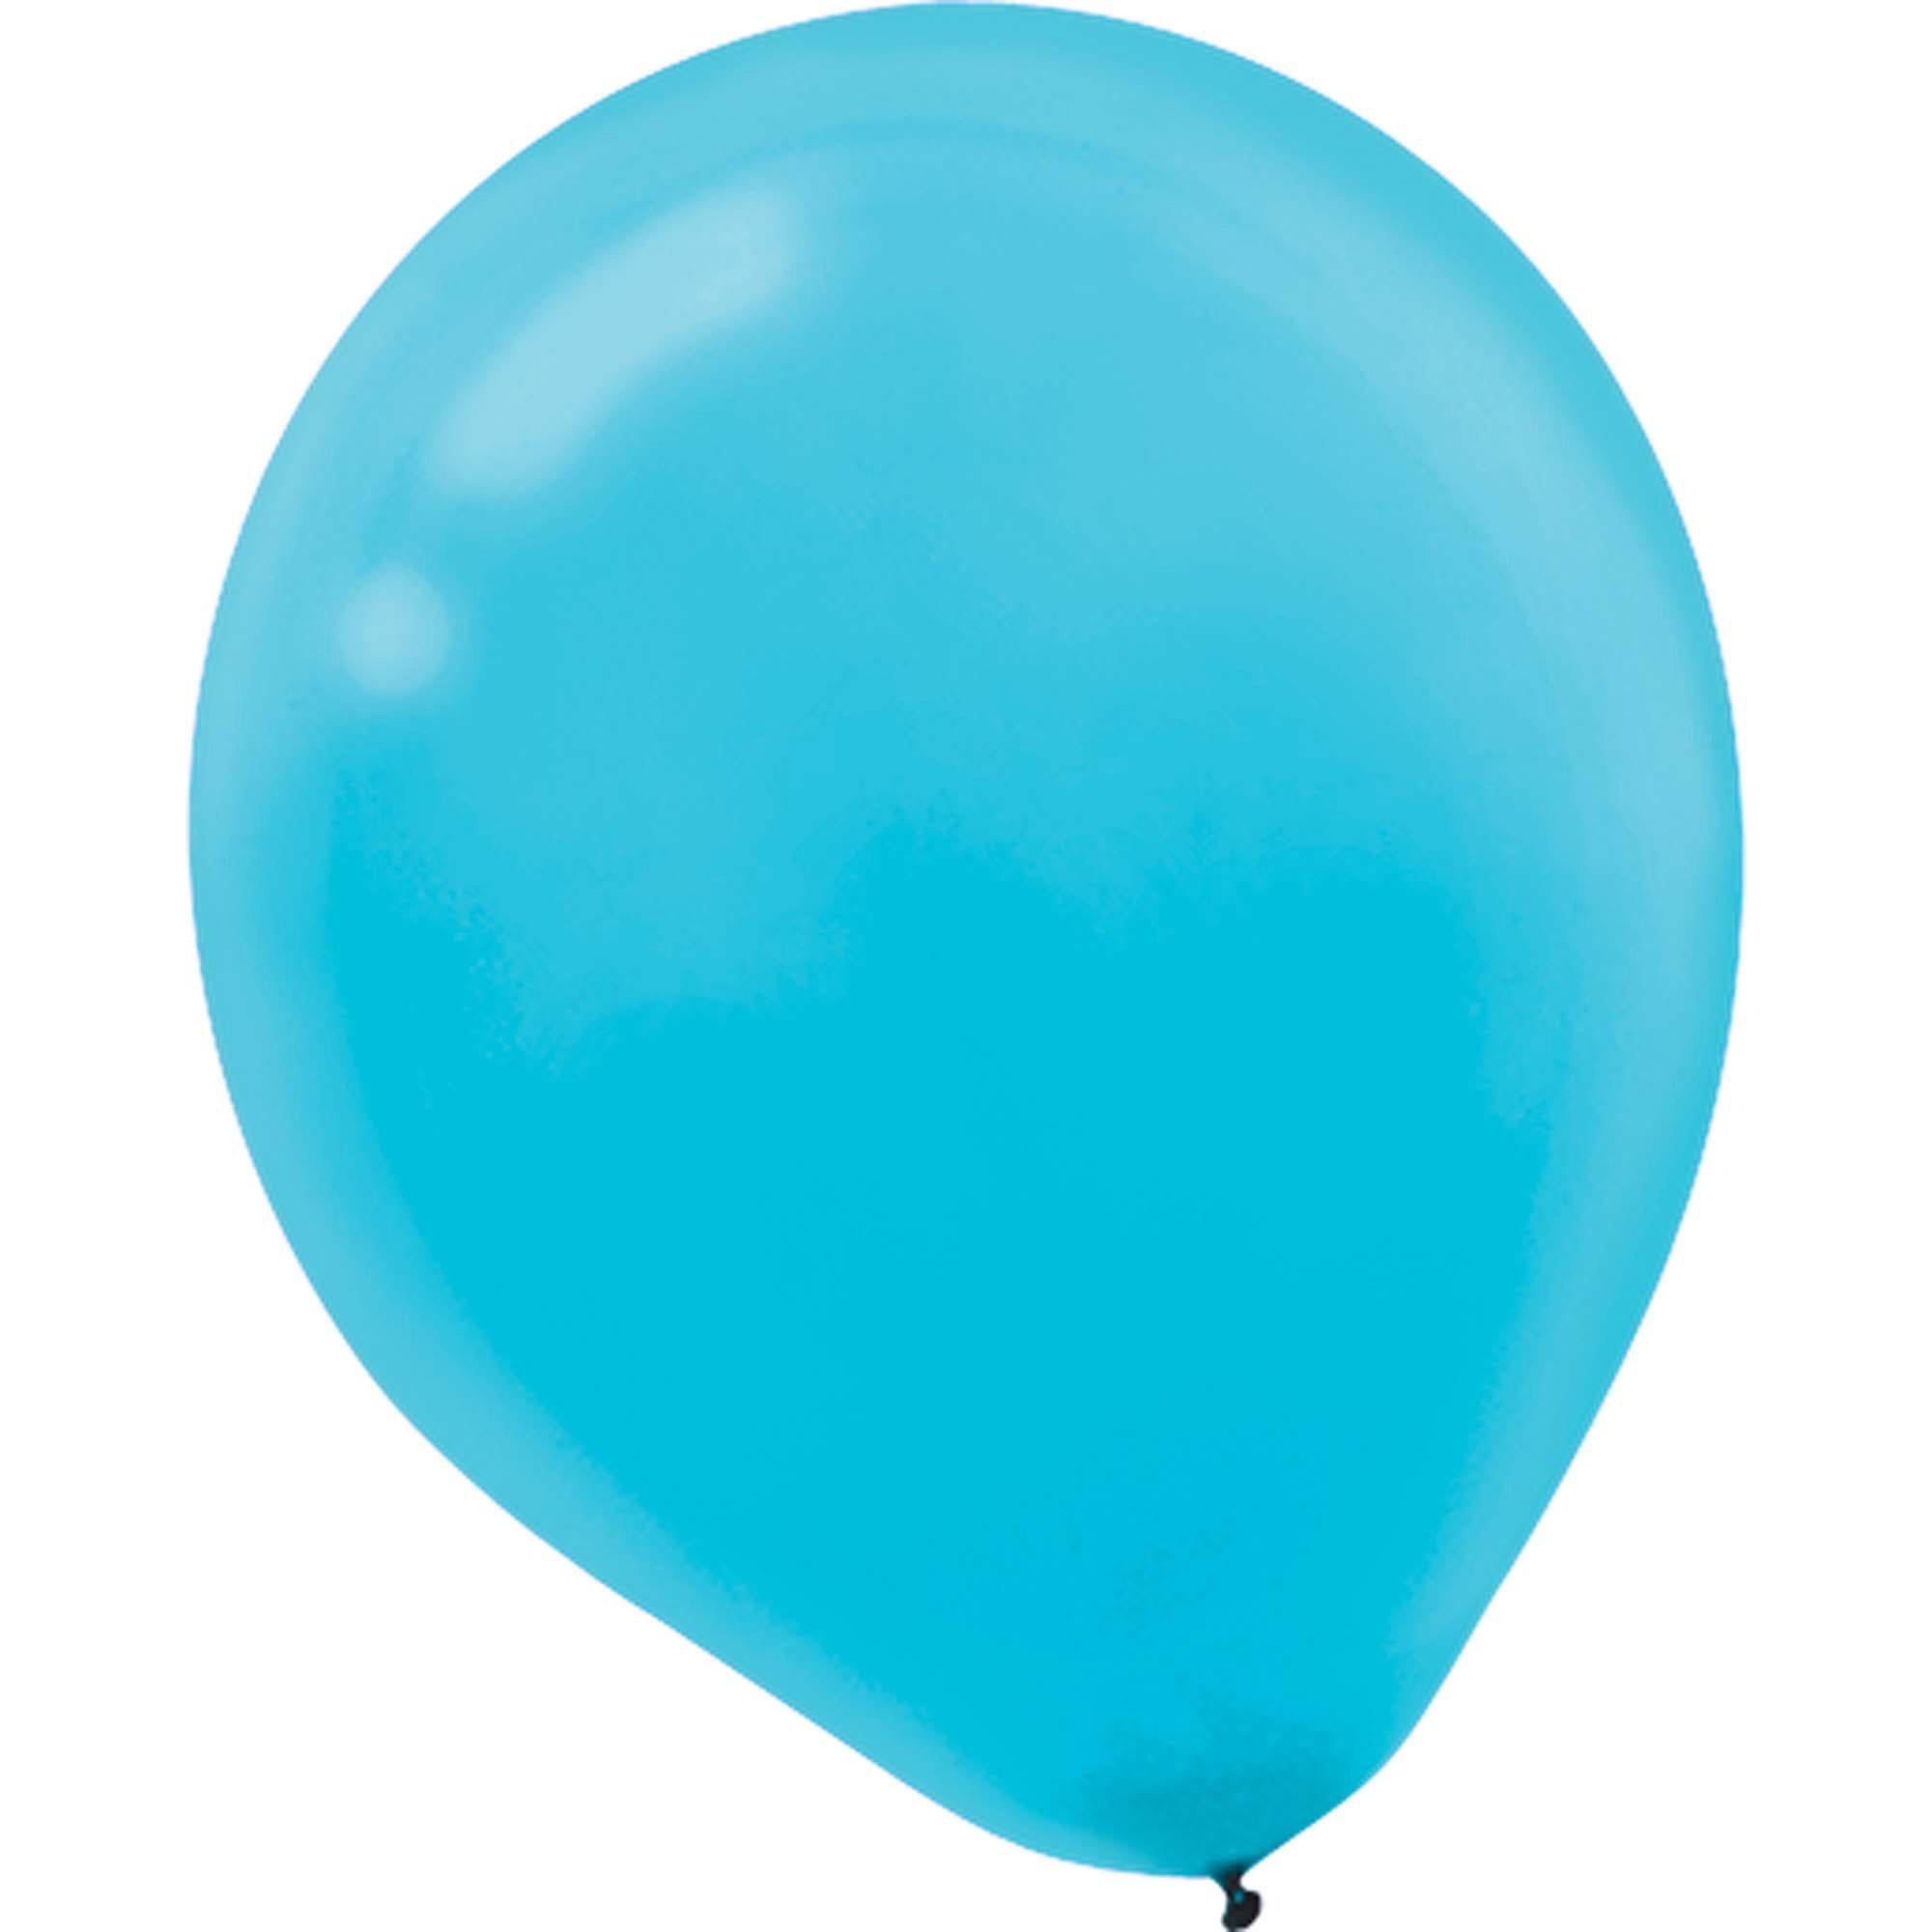 Standard Caribbean Blue Latex Balloons 12in, 50pcs Balloons & Streamers - Party Centre